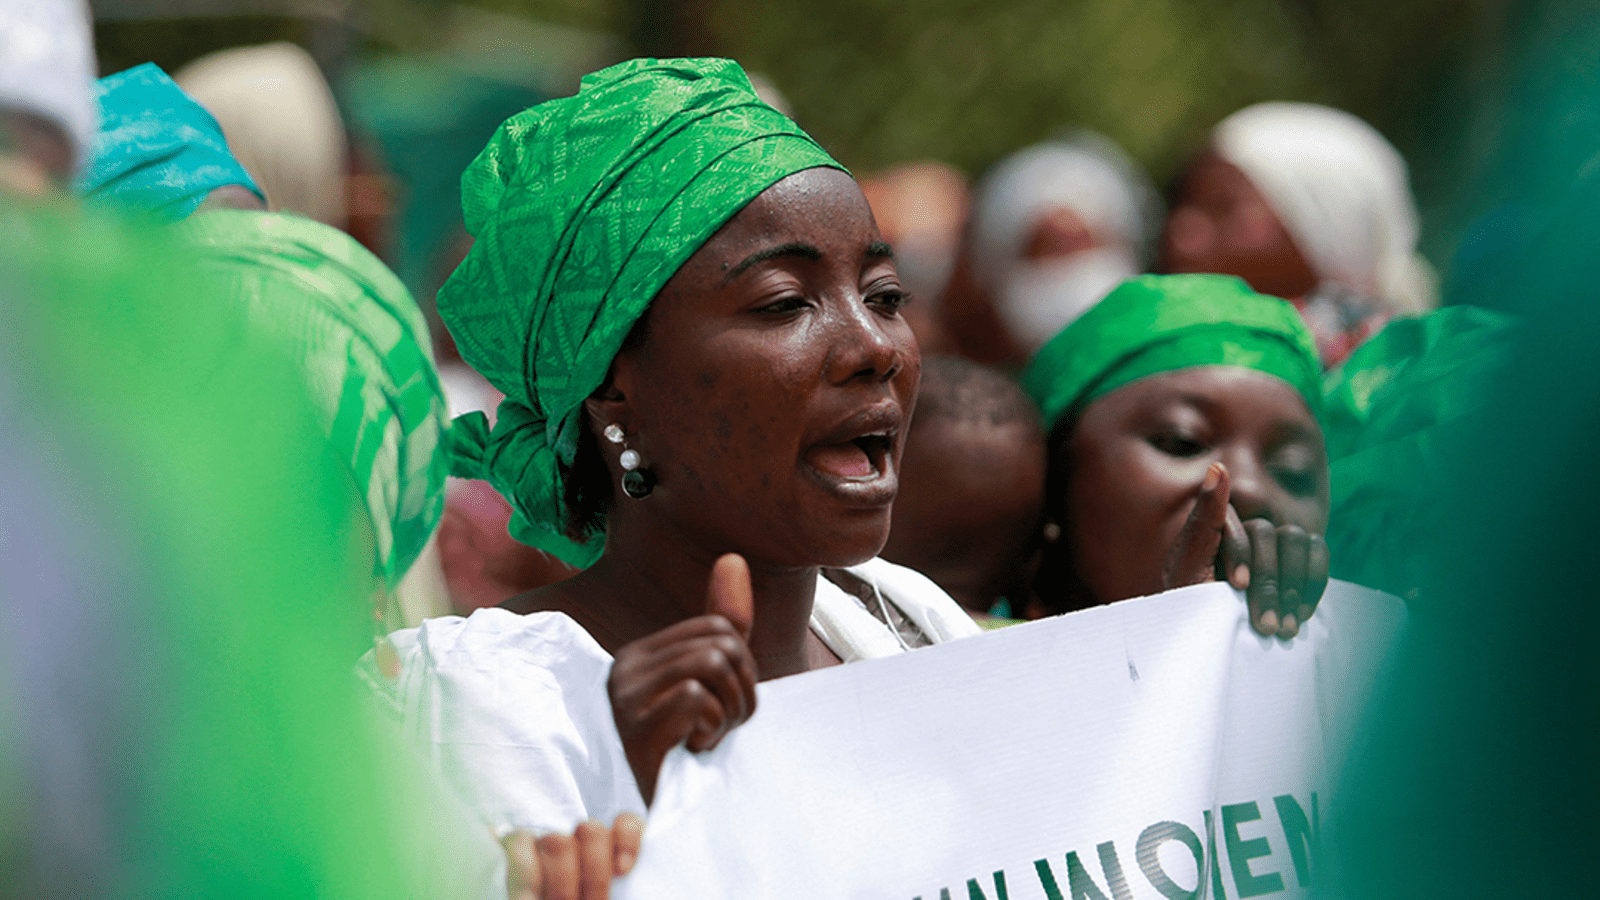 Nigerias Struggle for Gender Equality Gathers Pace Amid Protests Council on Foreign Relations